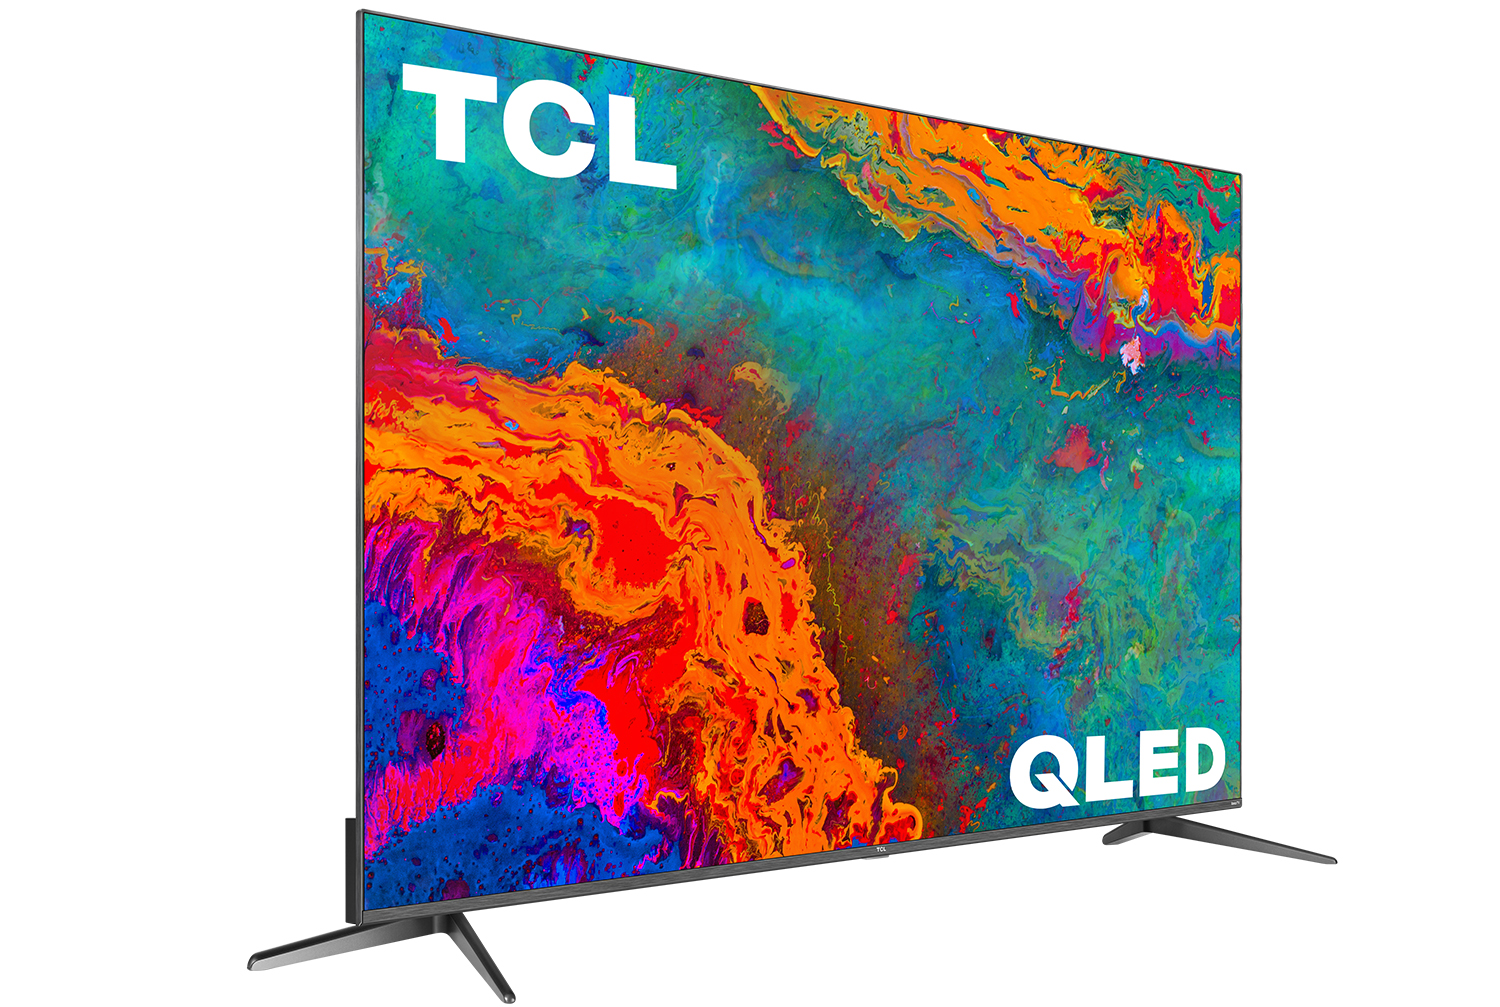 The 75-inch TCL Class 5 Series QLED 4K TV with a colorful scene on the screen.